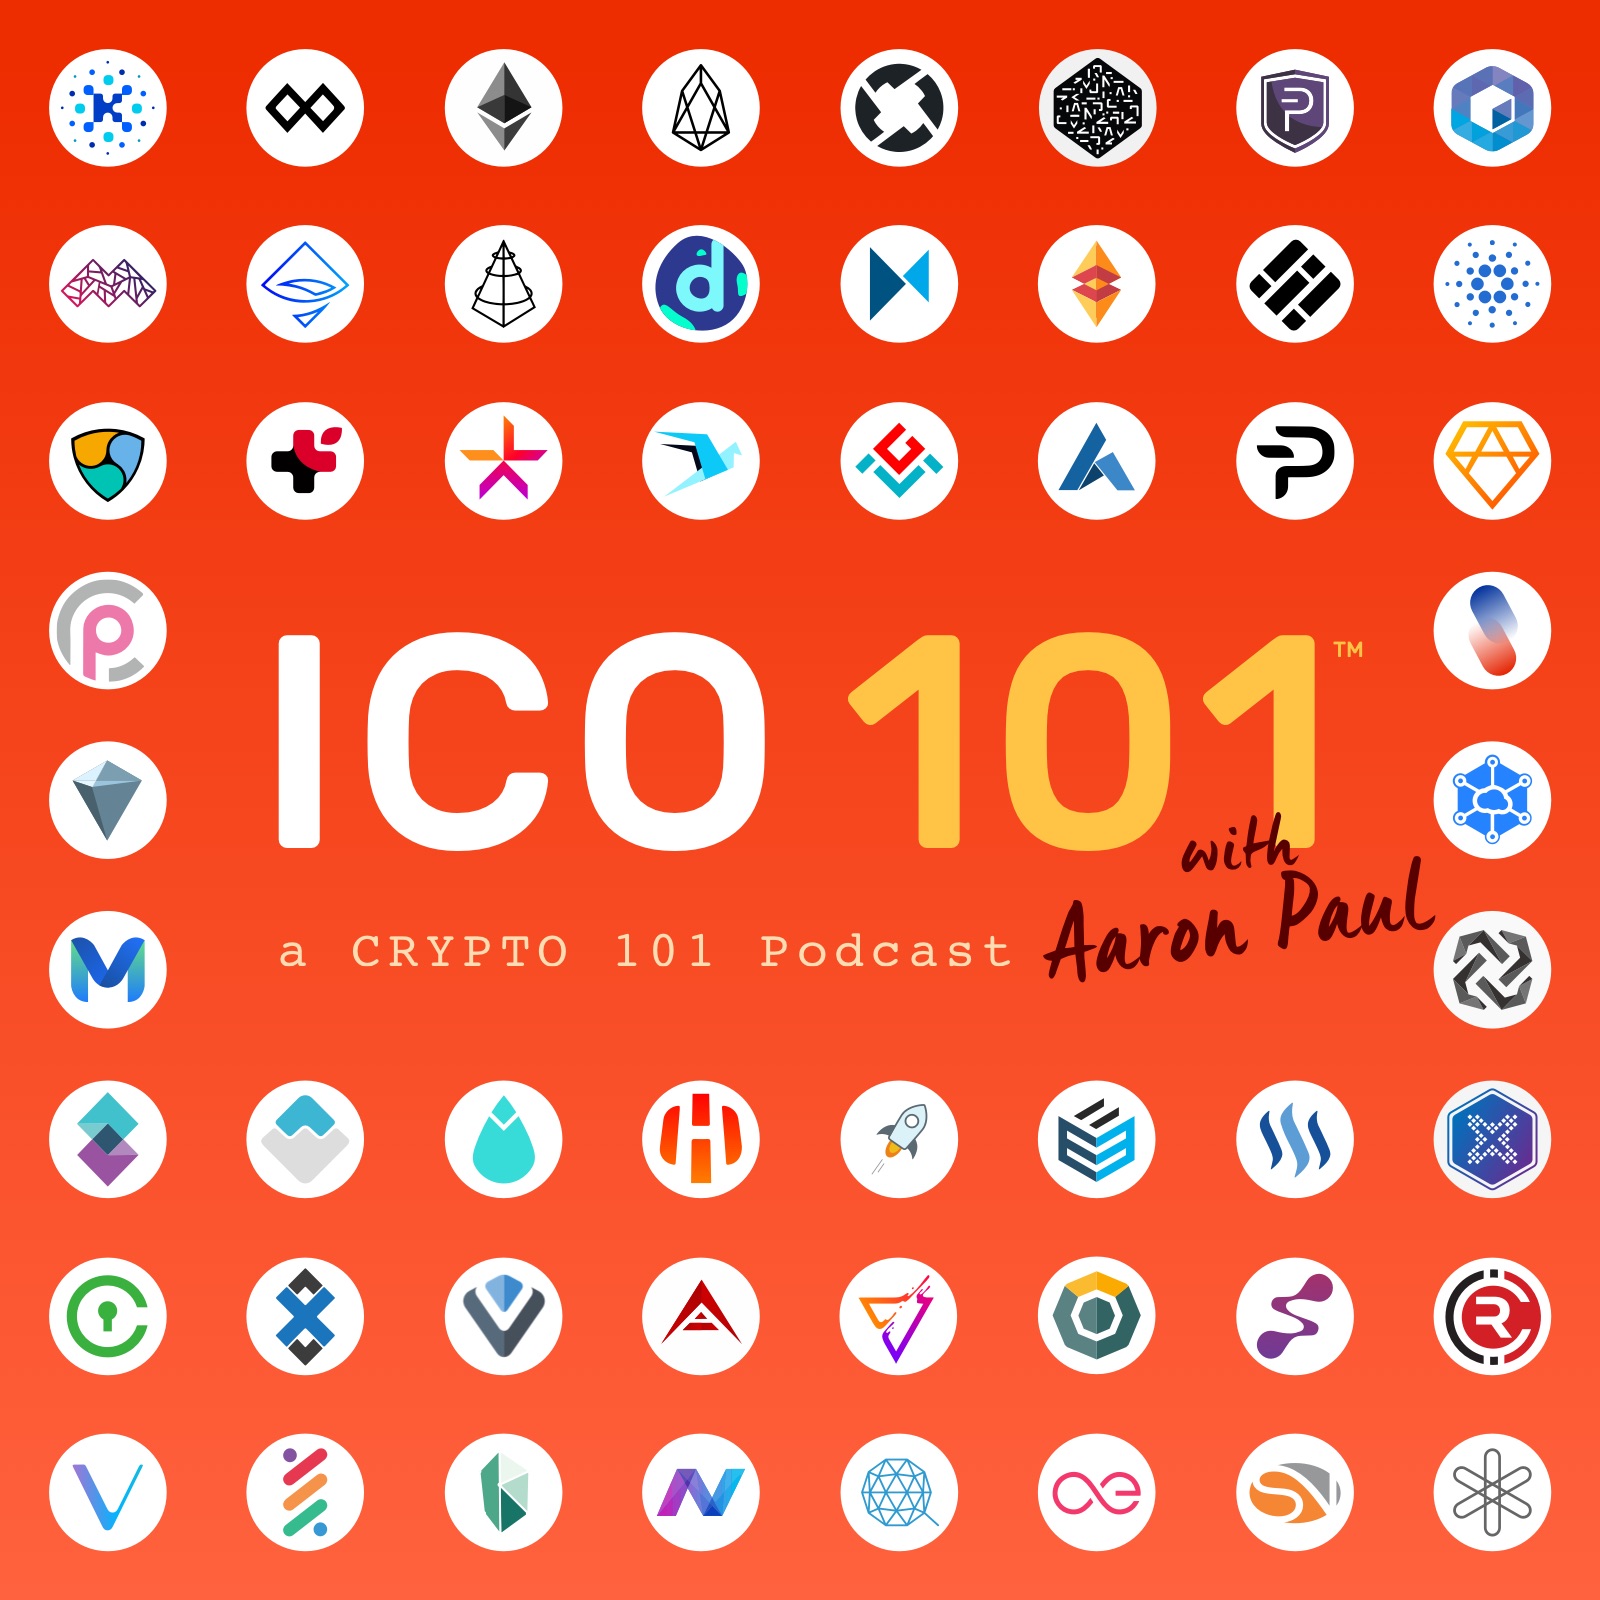 ICO 101: the average consumers guide to ICOs